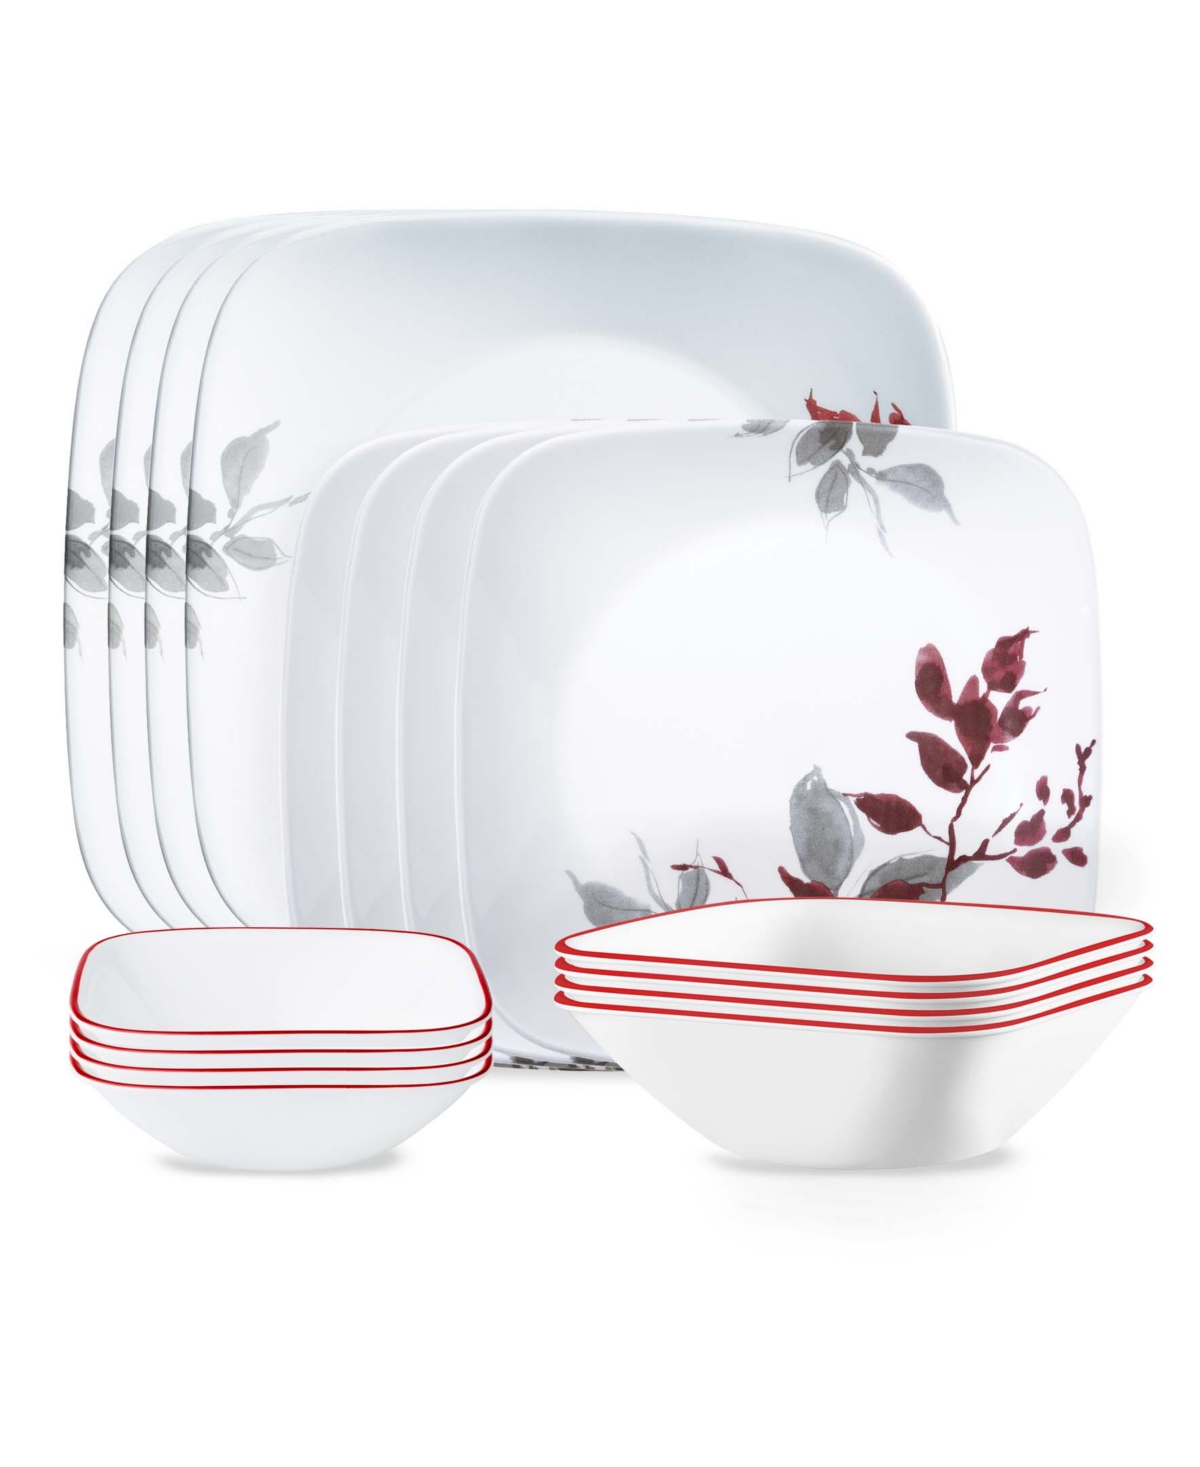 Square Kyoto Leaves 16 Piece Dinnerware Set, Service for 4 - White